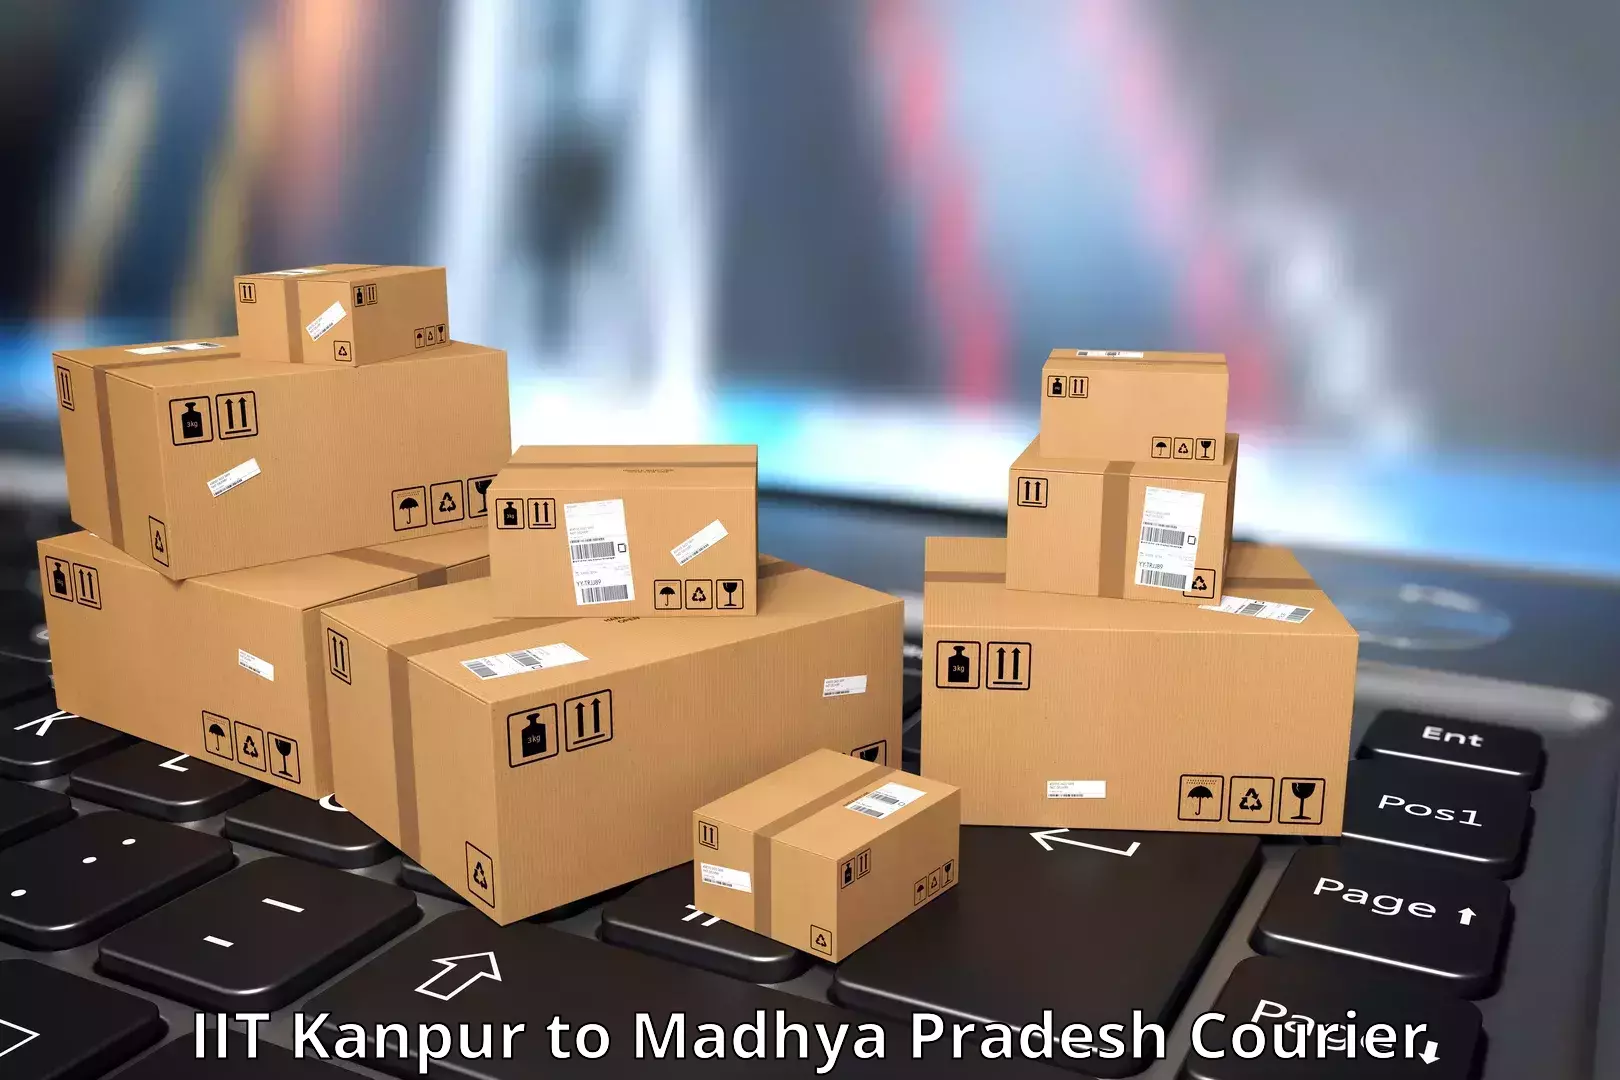 Professional courier services IIT Kanpur to Ujjain